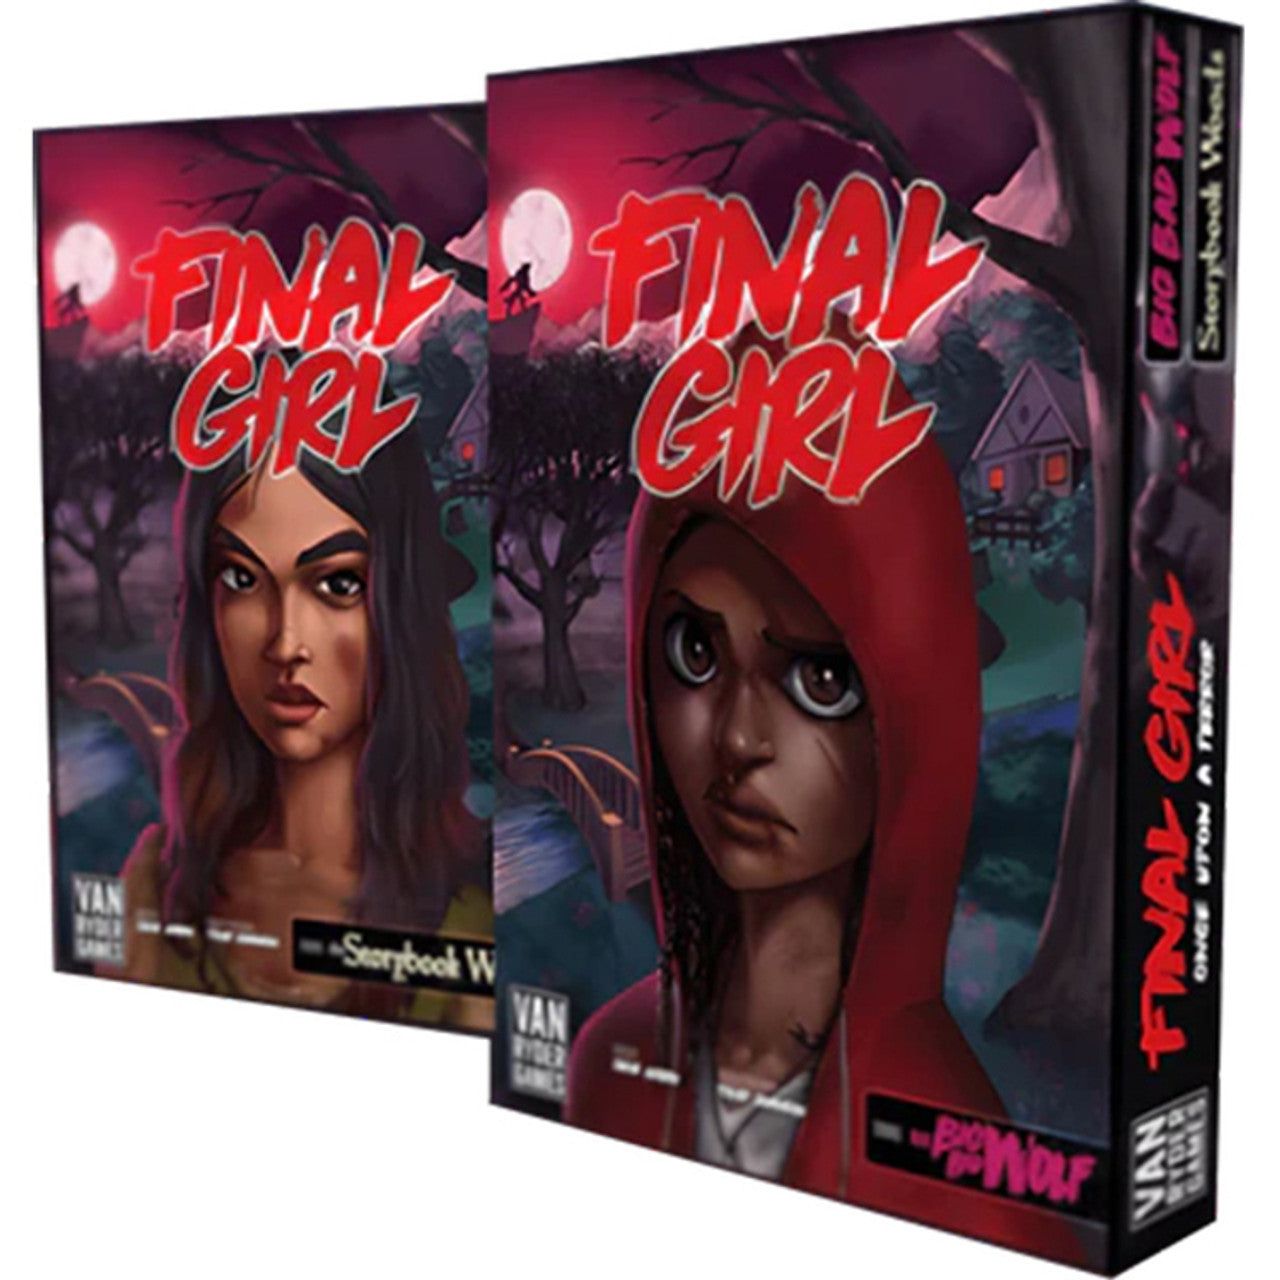 Final Girl: Series 2 - Once Upon A Full Moon